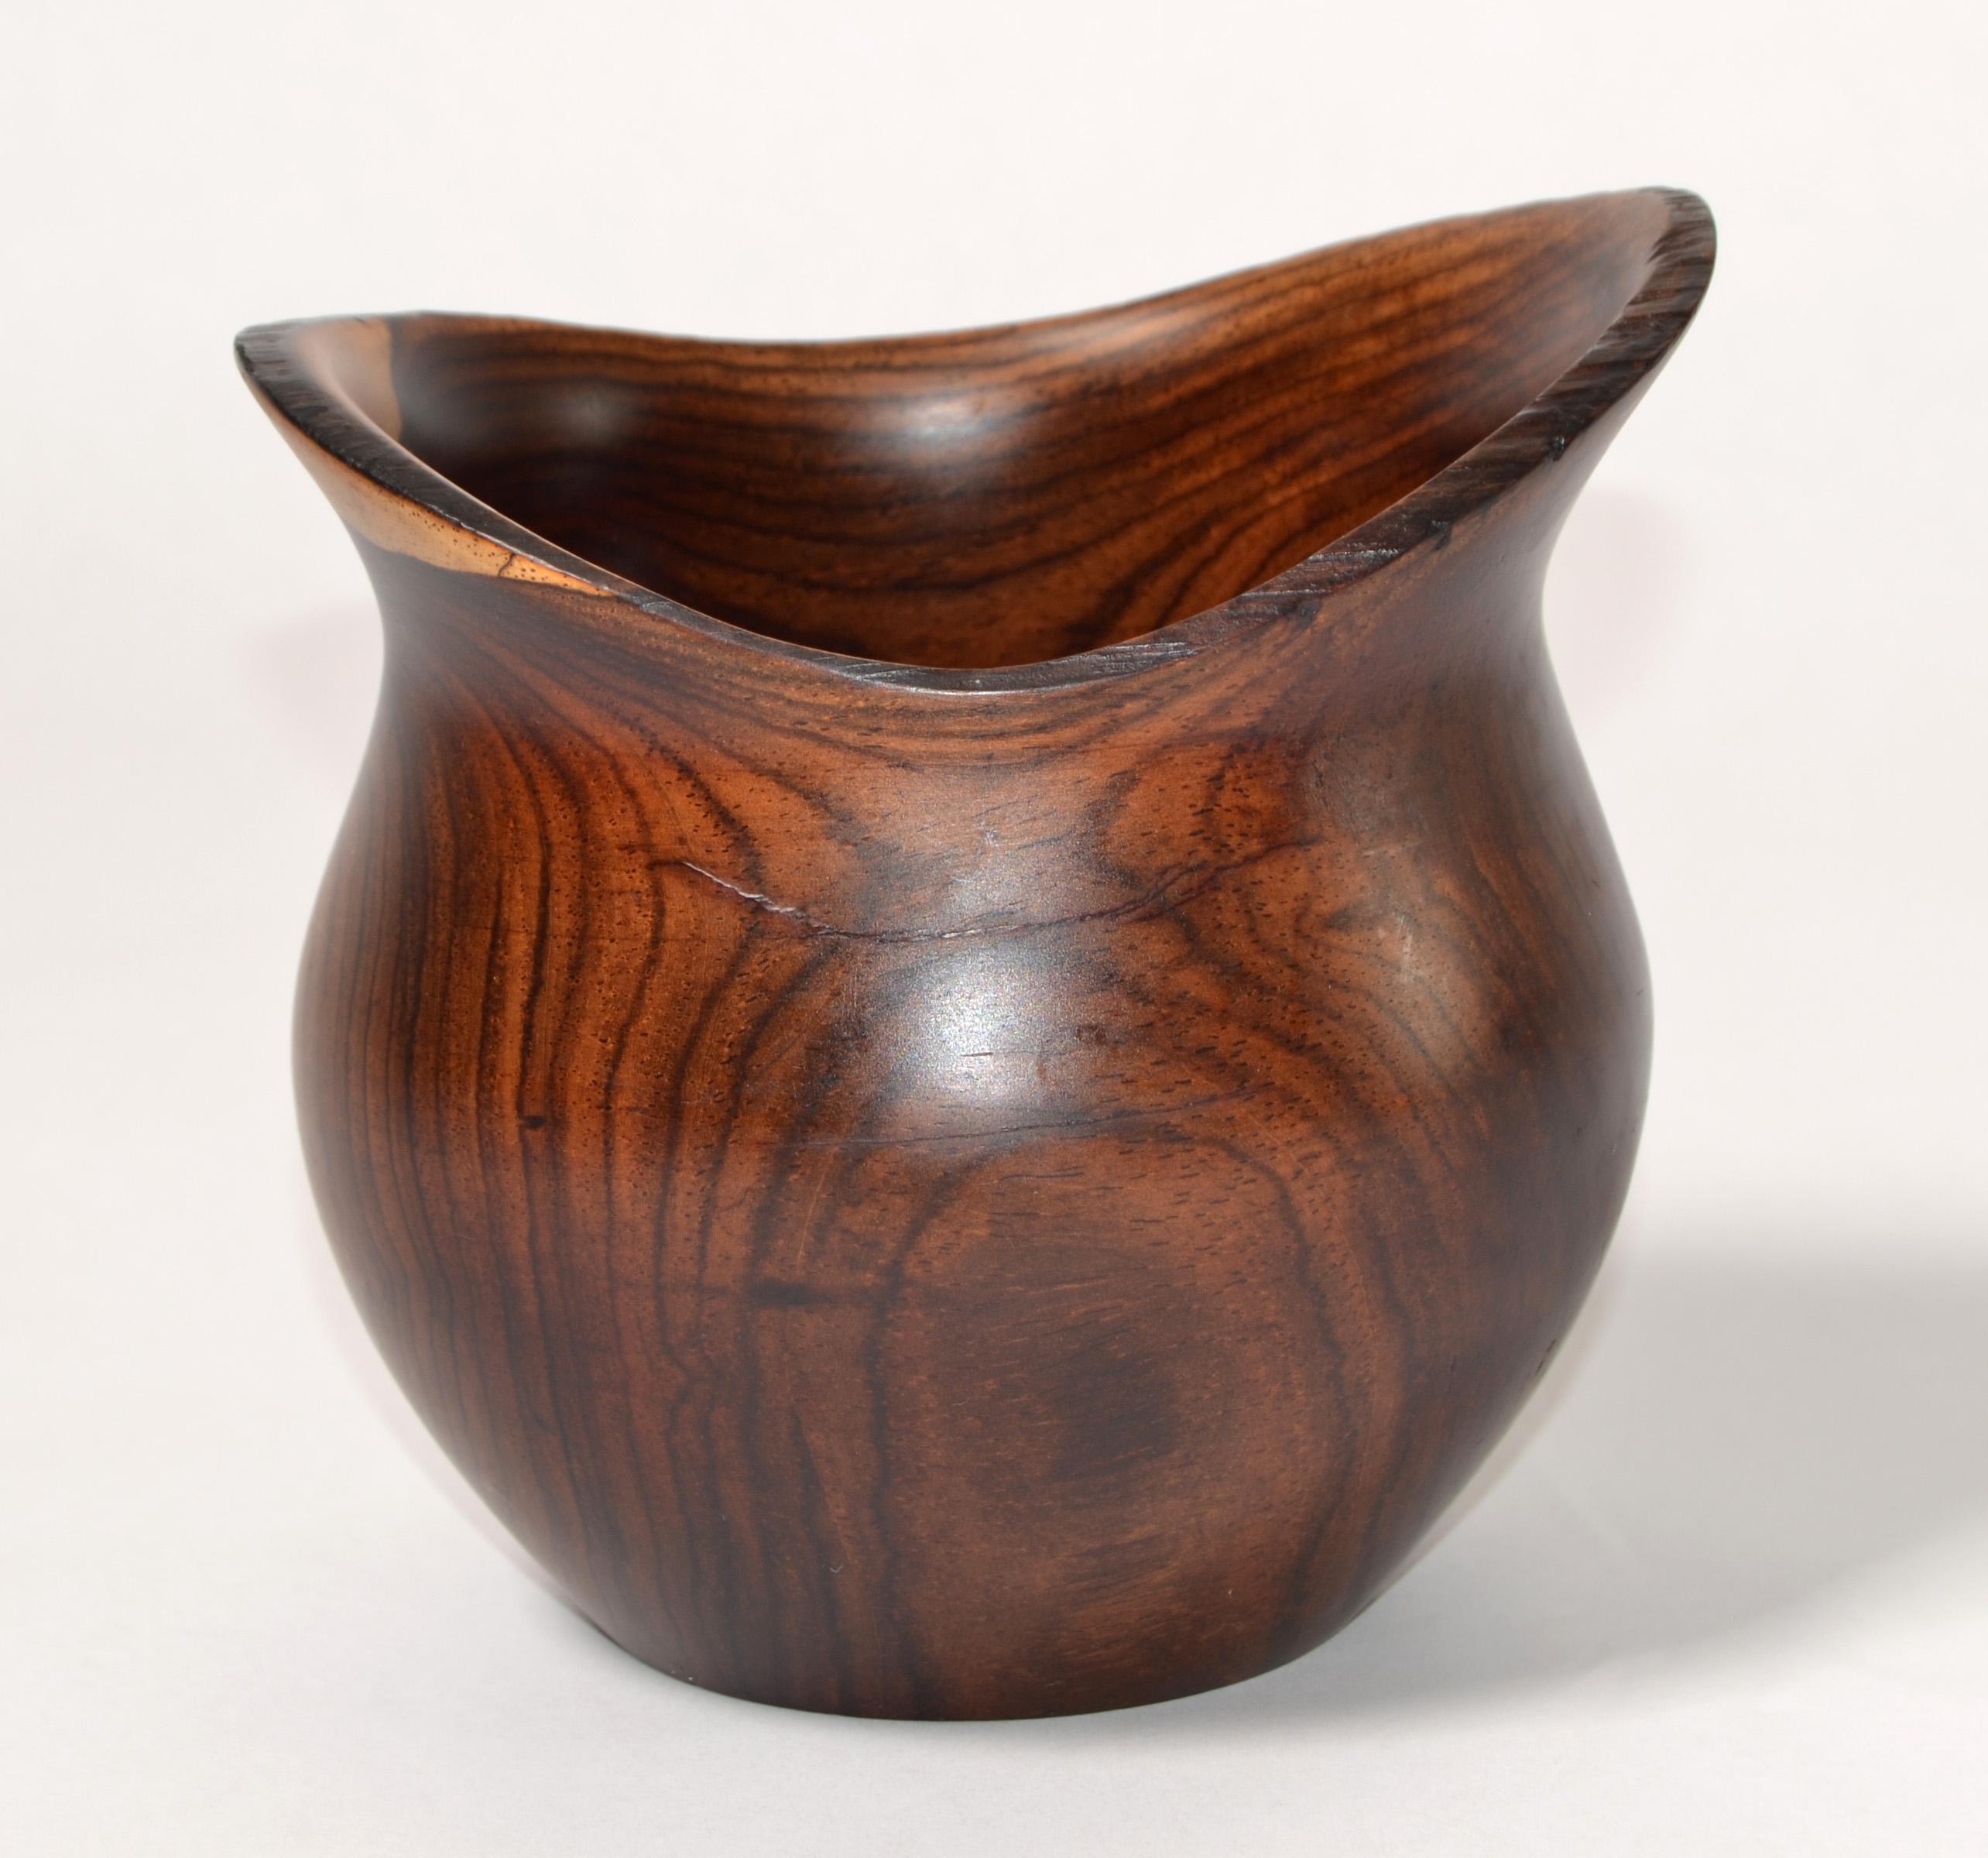 Vintage Arts and Crafts Period, circa 1960s Cockhill Crafts Style midcentury modern design bud vase. It is hand turned in Yew wood of simple subtle cured form, emphasized by the contrasting Colors and grain of the wood. 
This lovely stylish piece